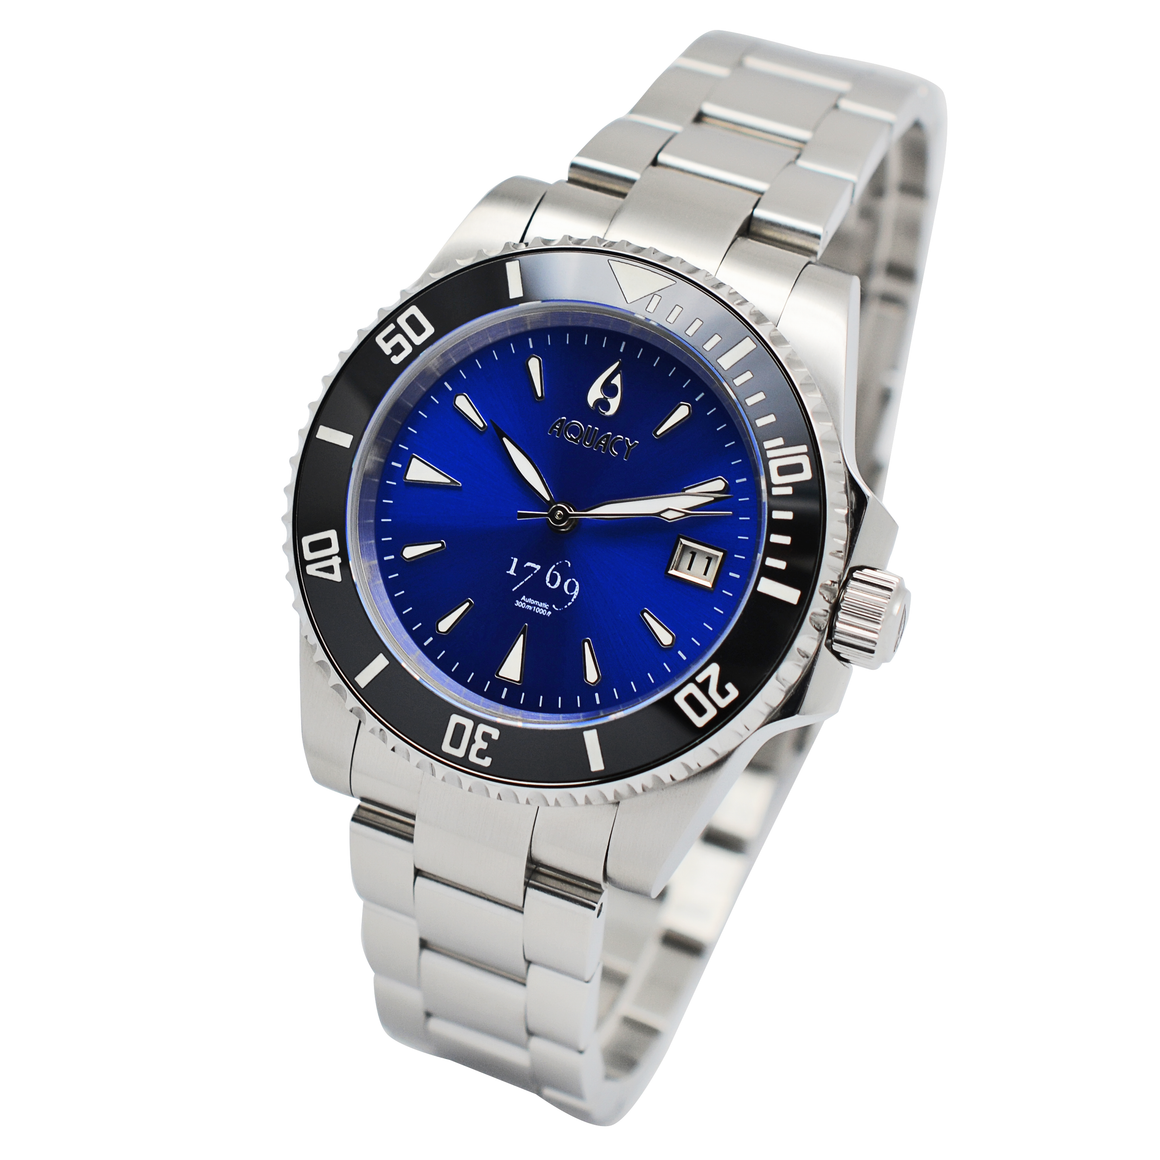 Buy Dive Watches, Top Rated Dive Watches, Affordable Dive Watches ...